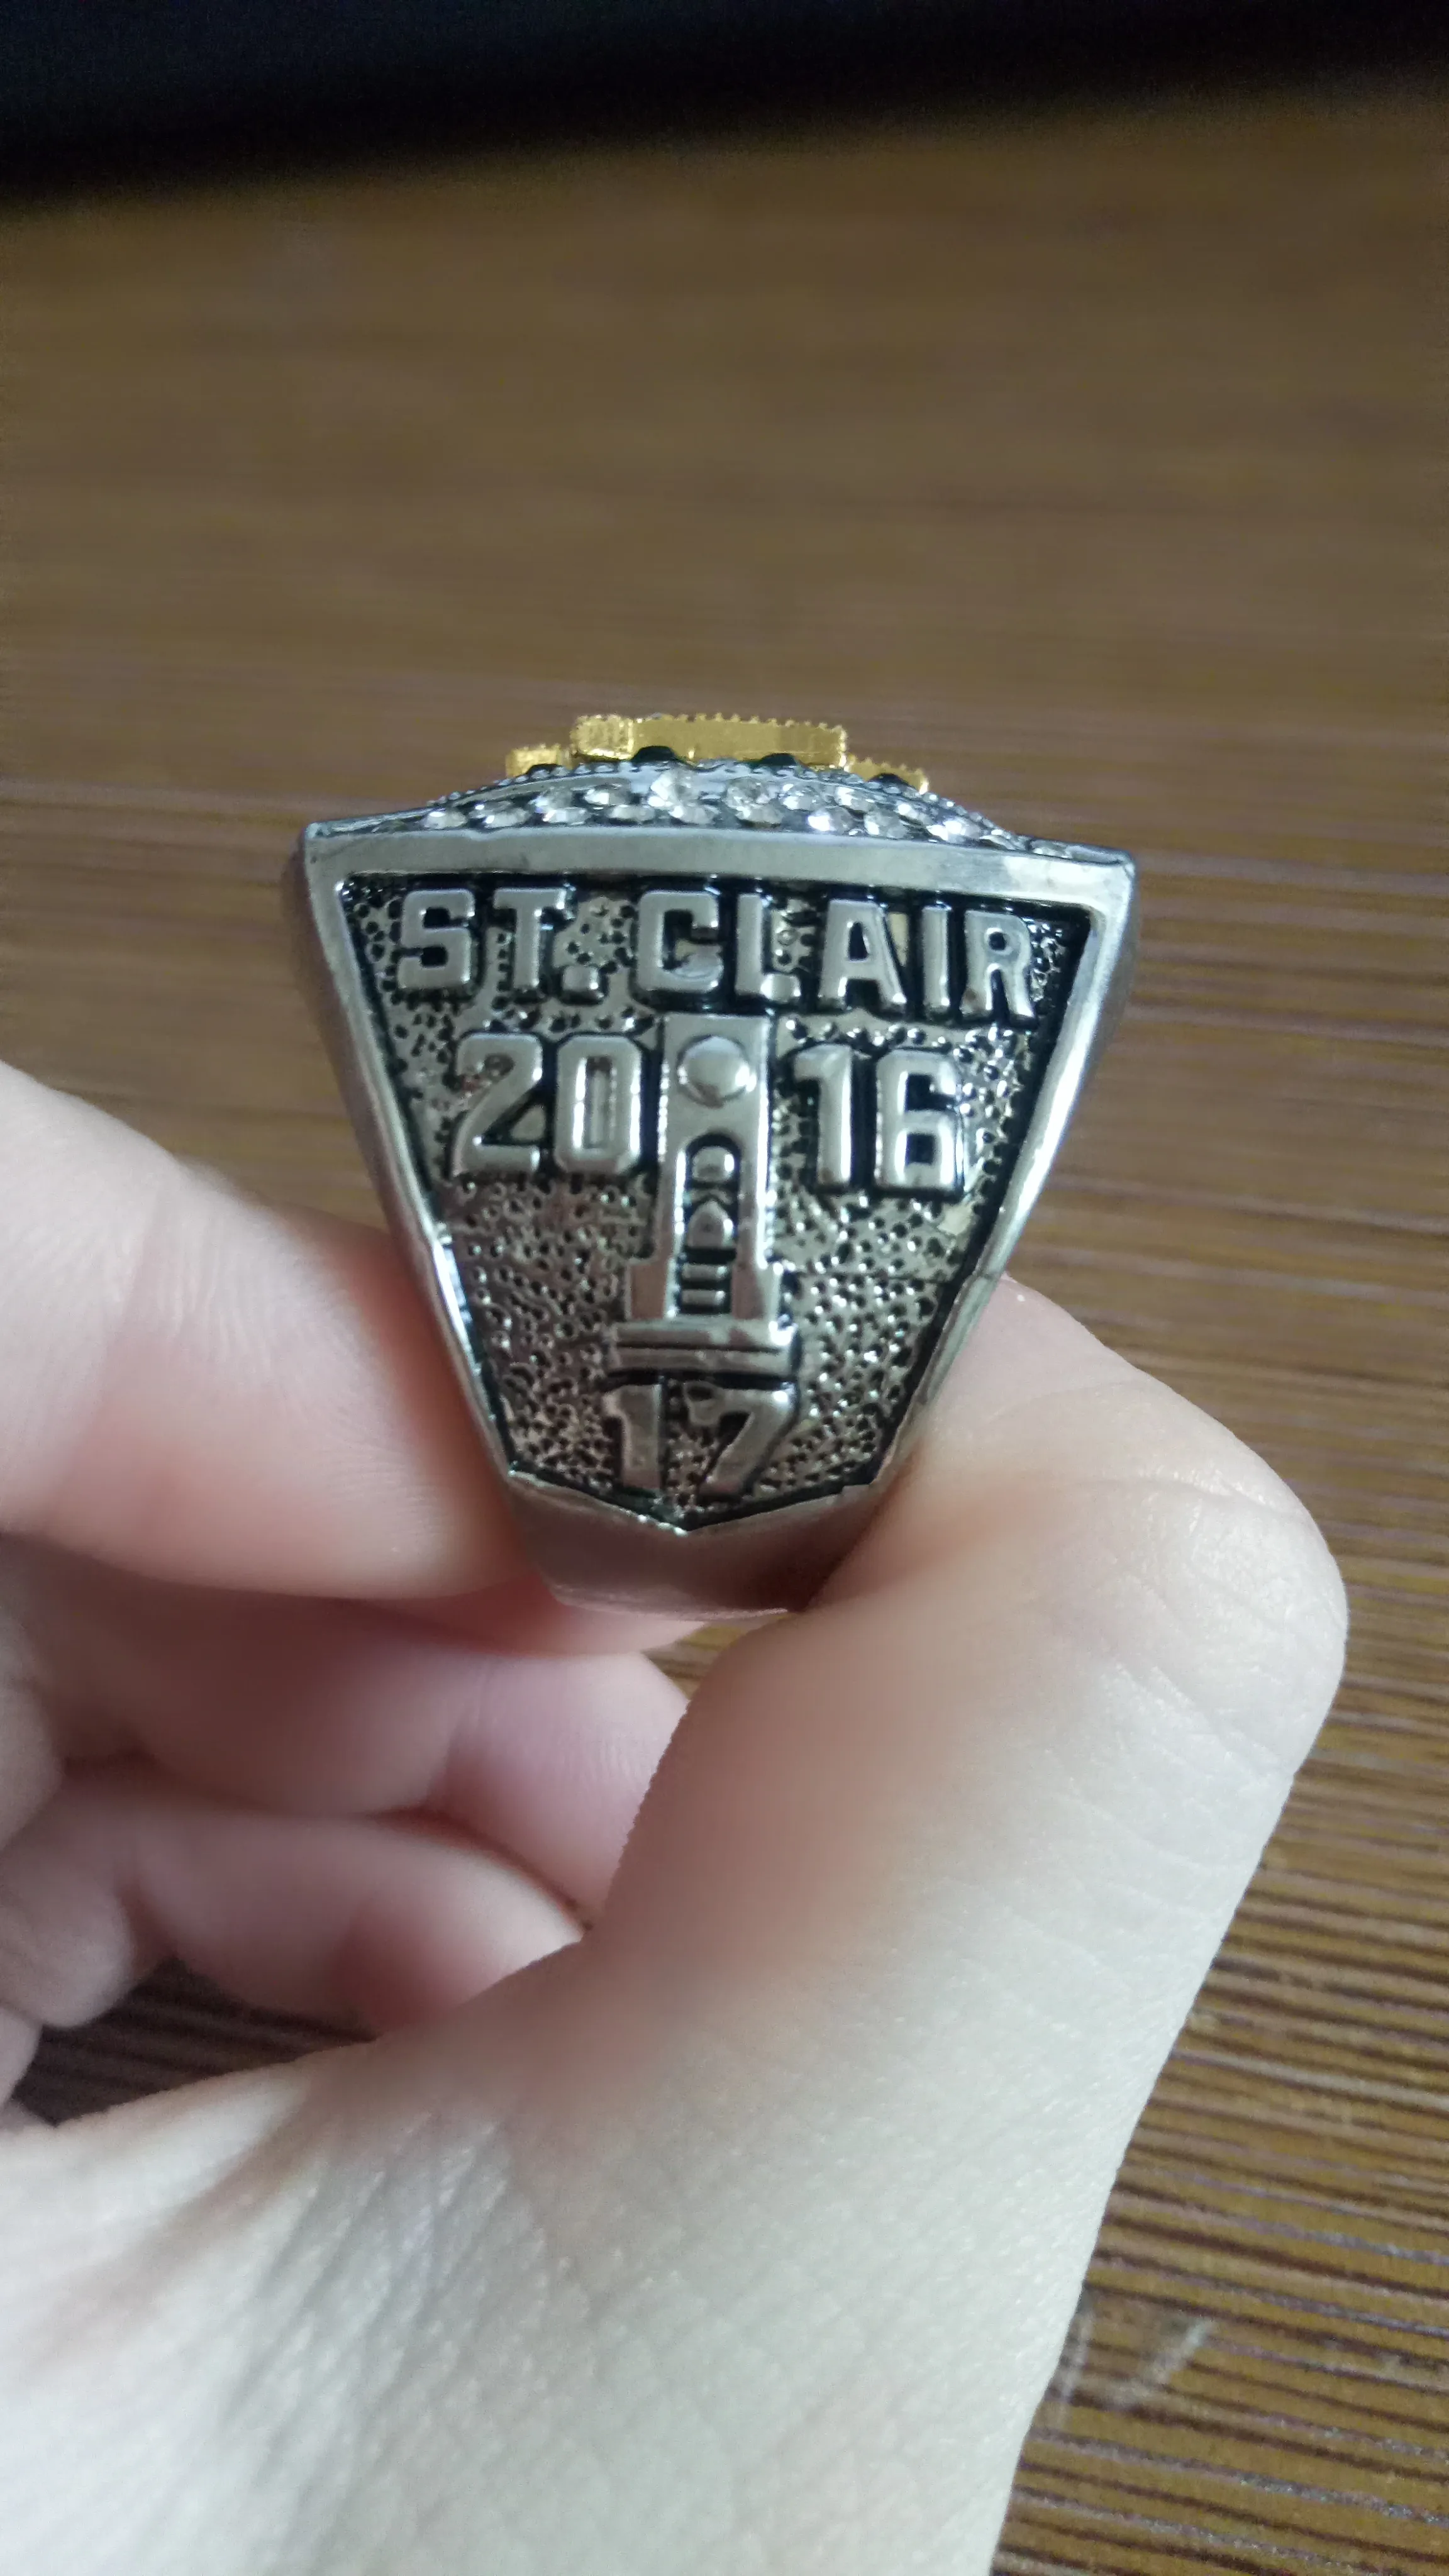 1988 BOISE STATE BRONCOS BASKETBALL BIG SKY CHAMPIONSHIP RING TOP PENDANT -  Buy and Sell Championship Rings